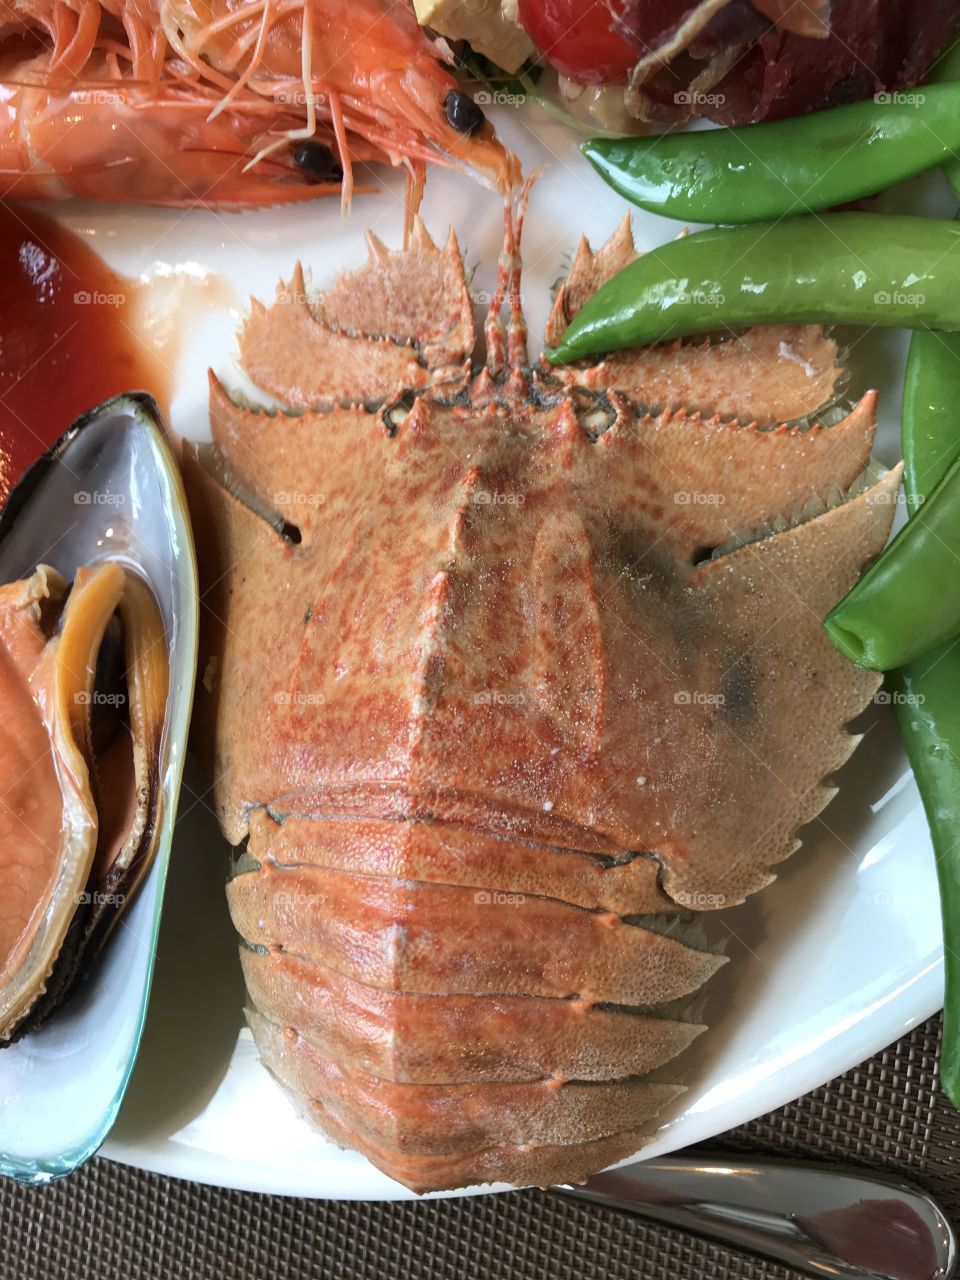 Mystery lunch seafood - the brunch options in the Shangri-La hotel offered exotic creatures 